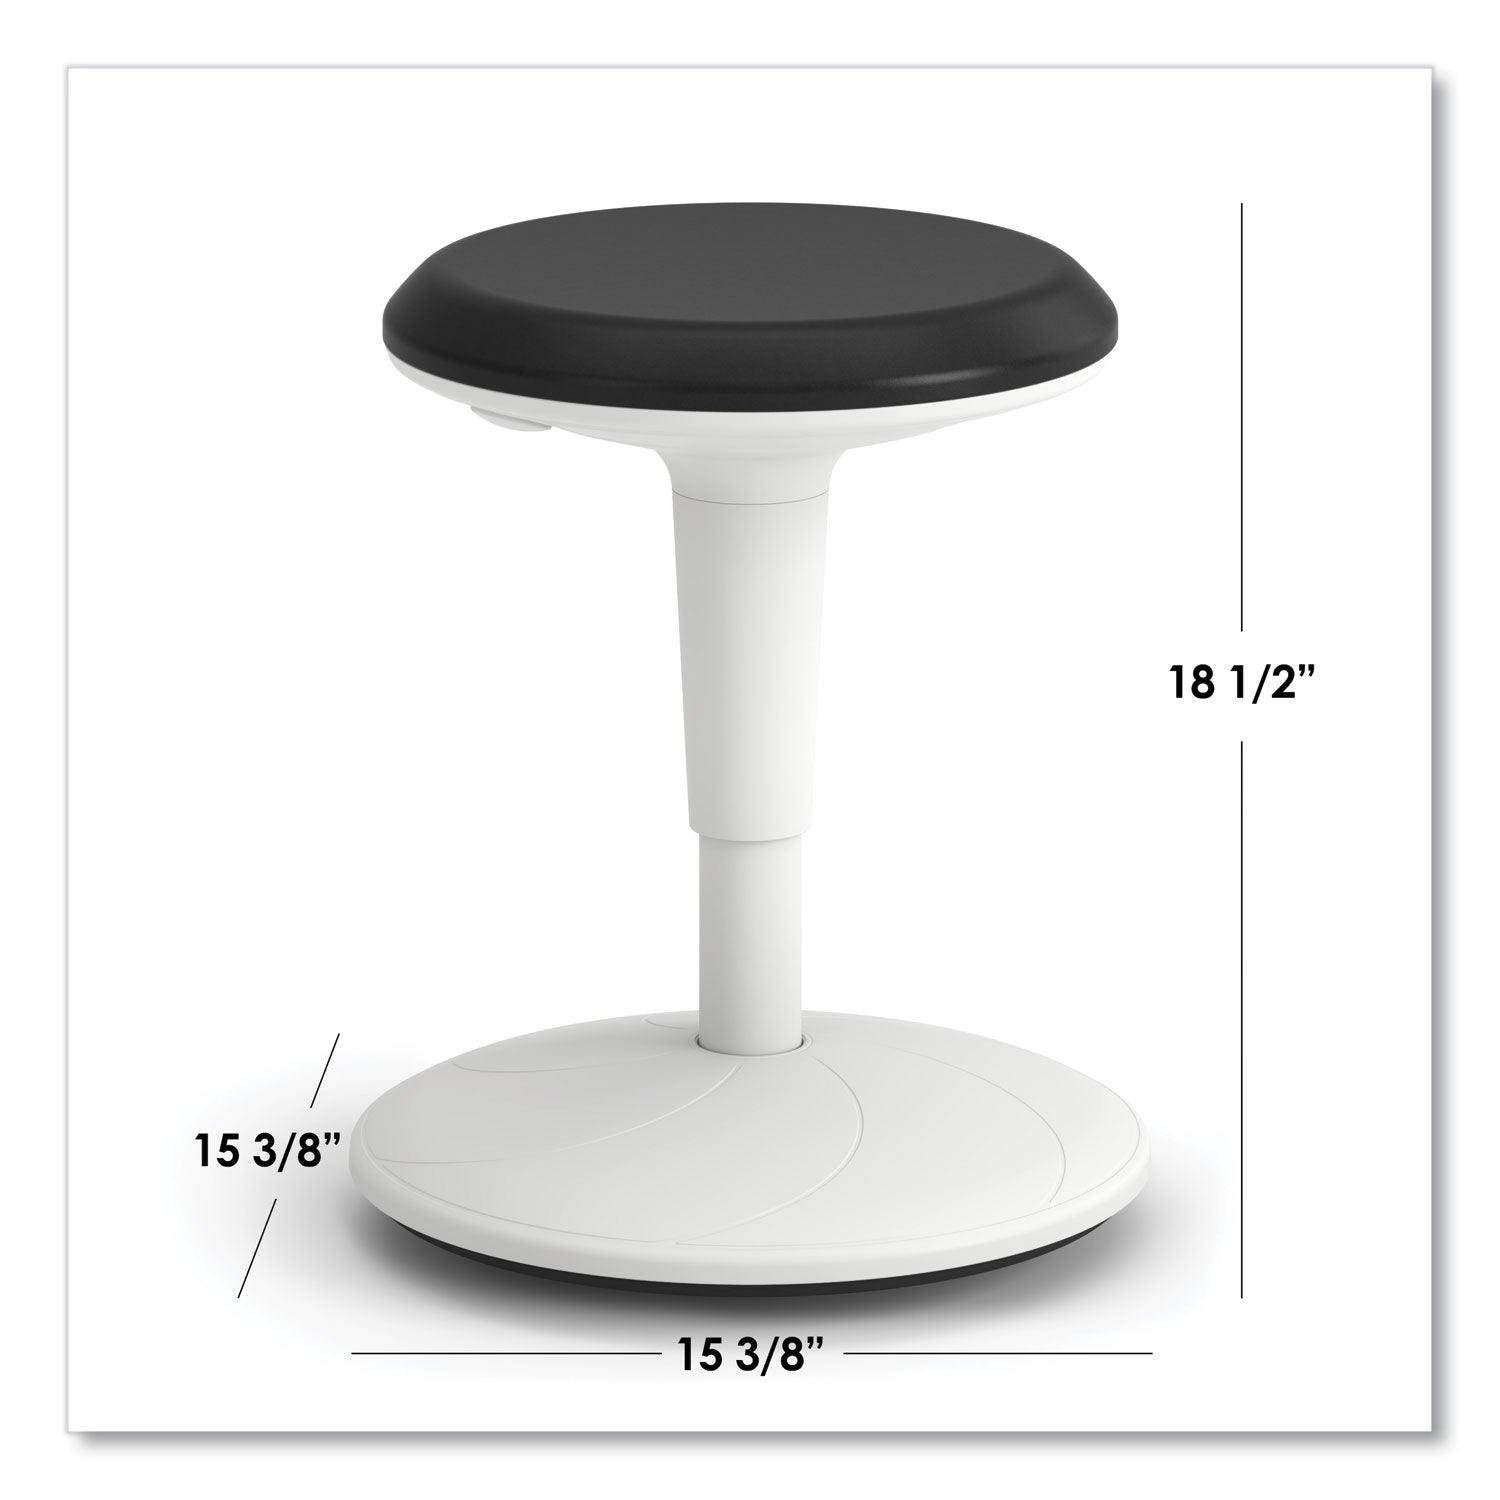 revel-adjustable-ht-fidget-stool-backlessup-to-250lb-1375-to-185-seat-htblack-seat-white-base-ships-in-7-10-bus-days_honhefs01bl - 2